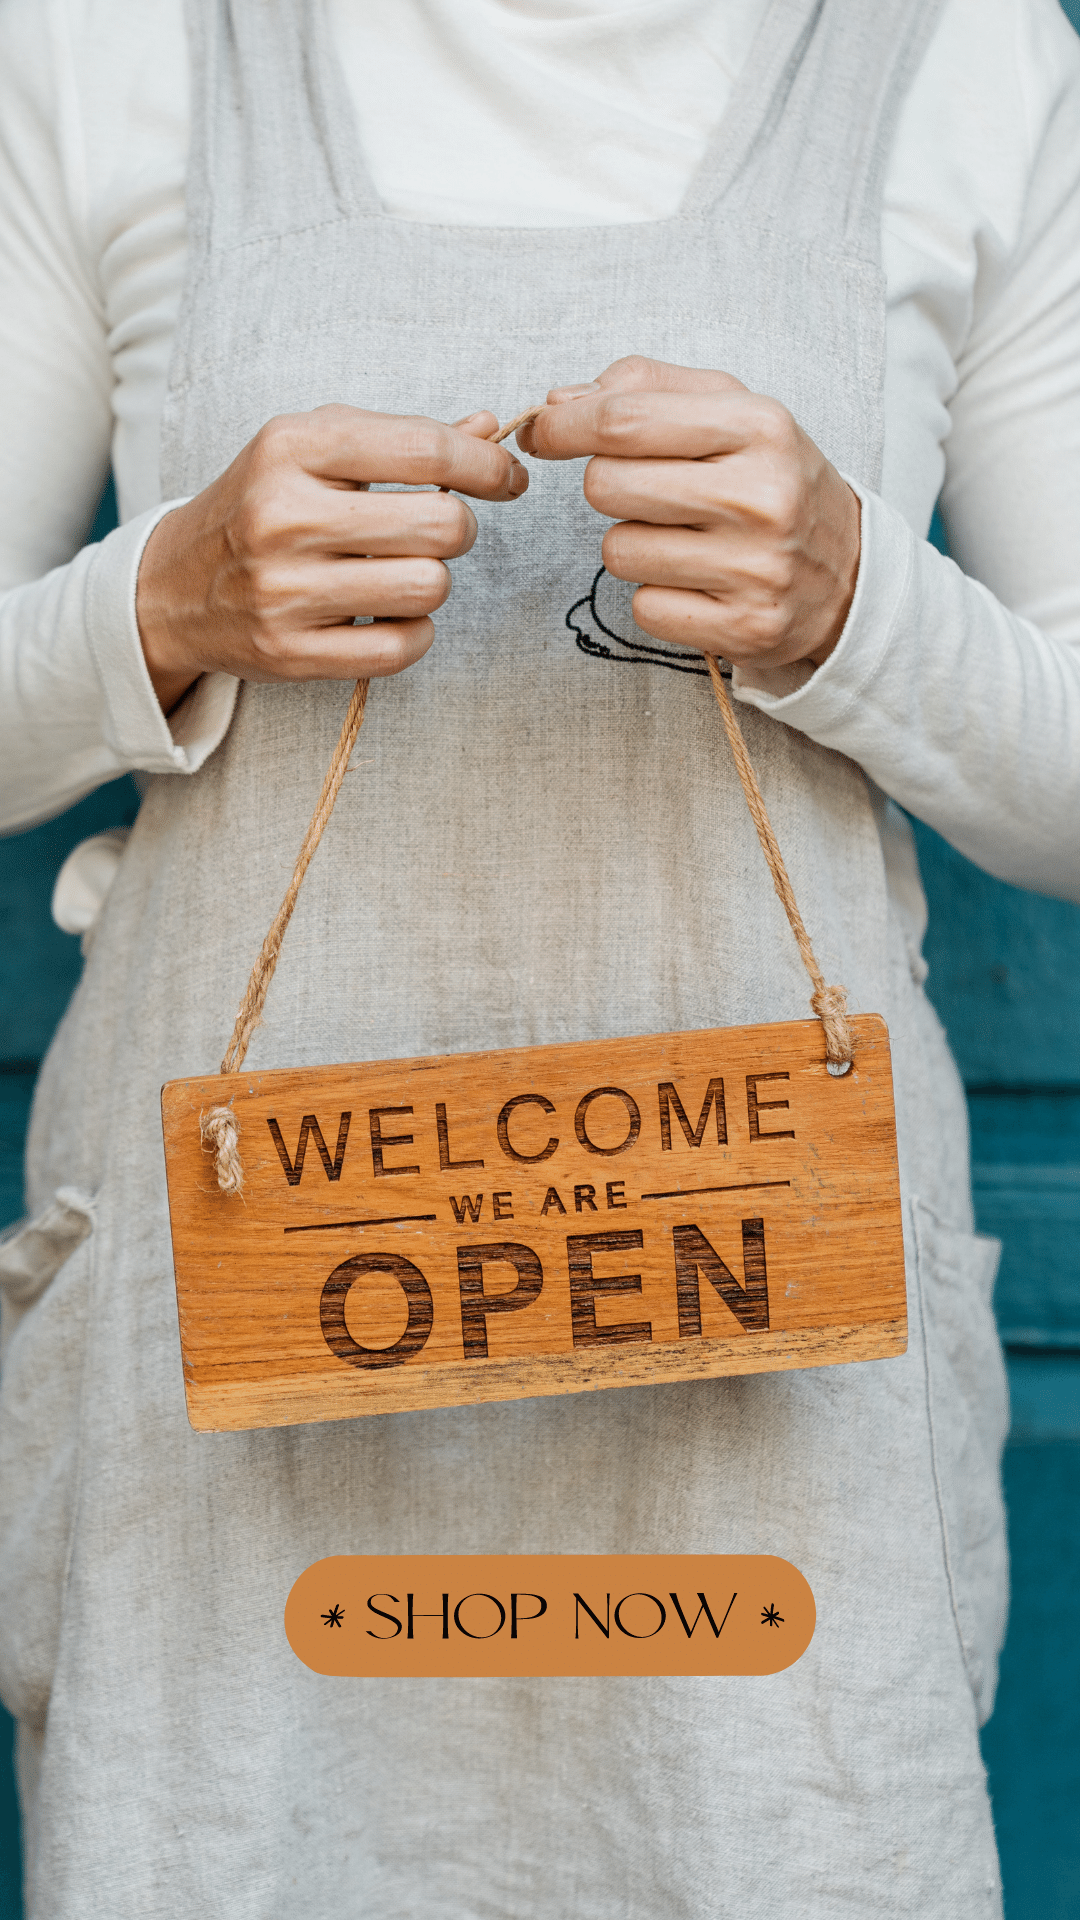 Woman in a dress holding open sign with shop now button display to etsy shop